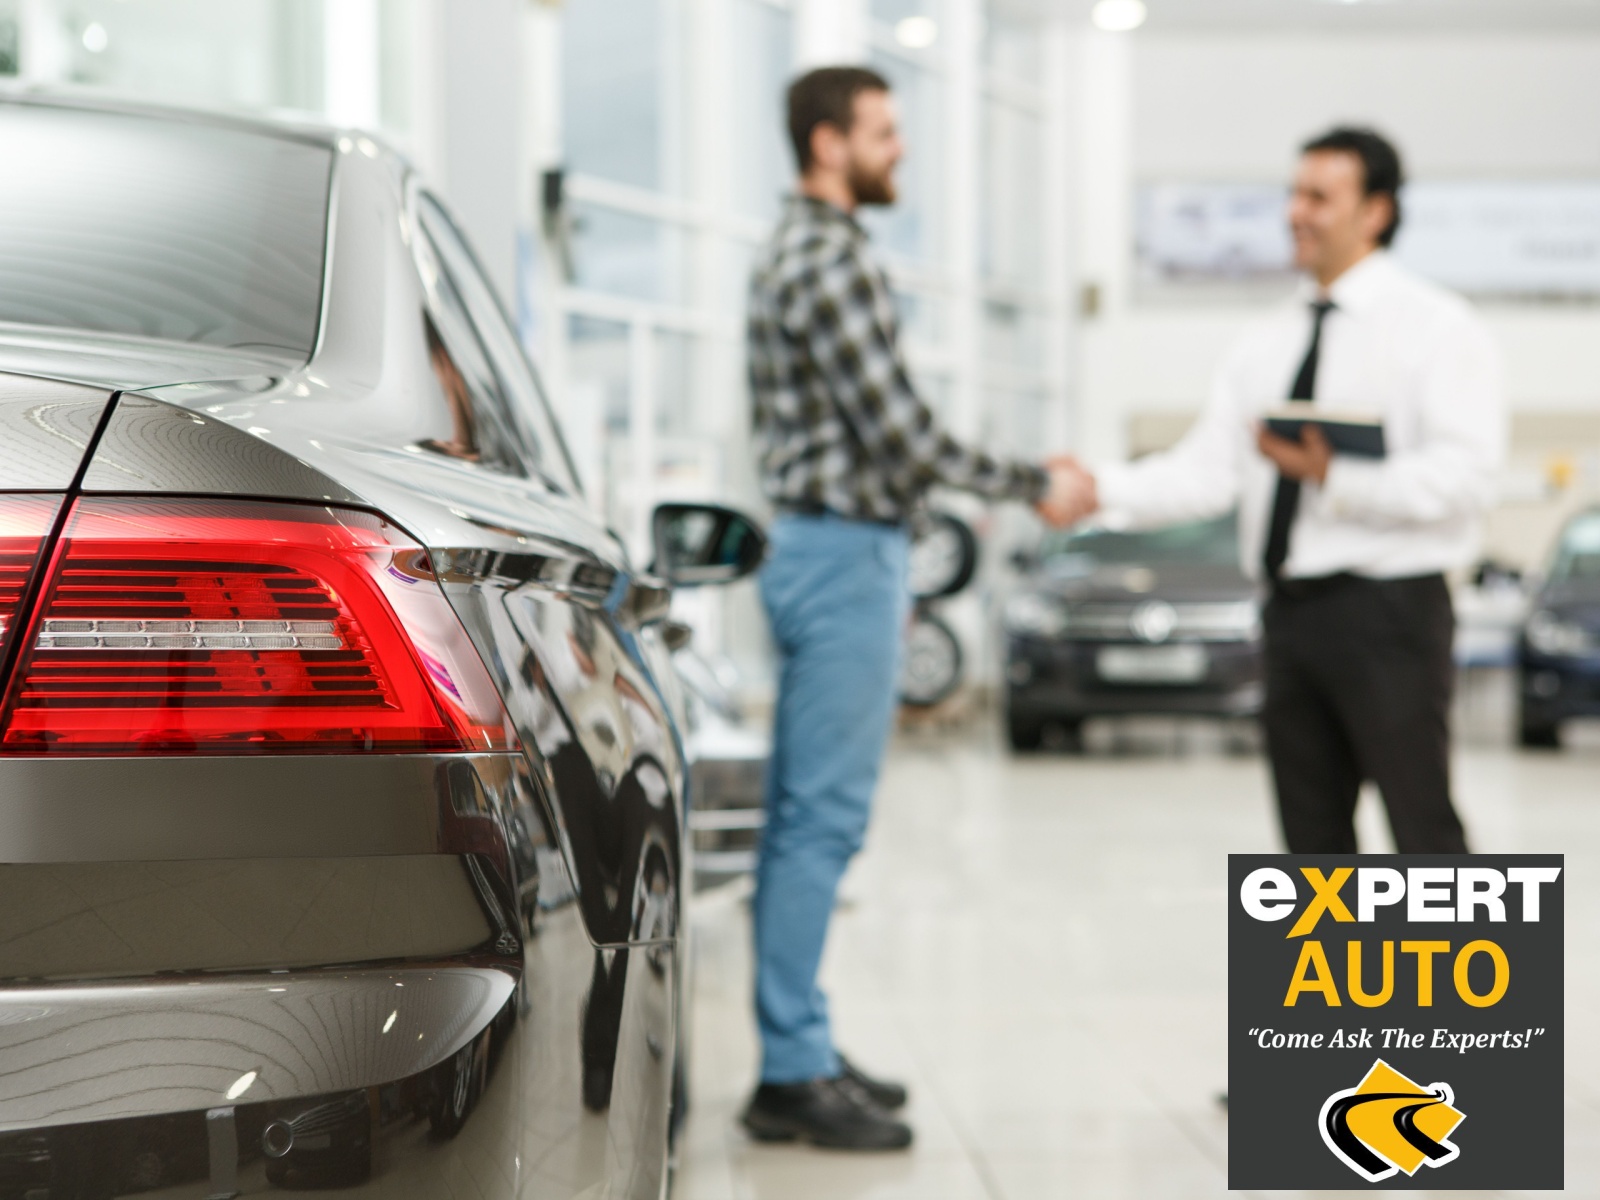 Debunking Commonly Used Auto Dealership Myths